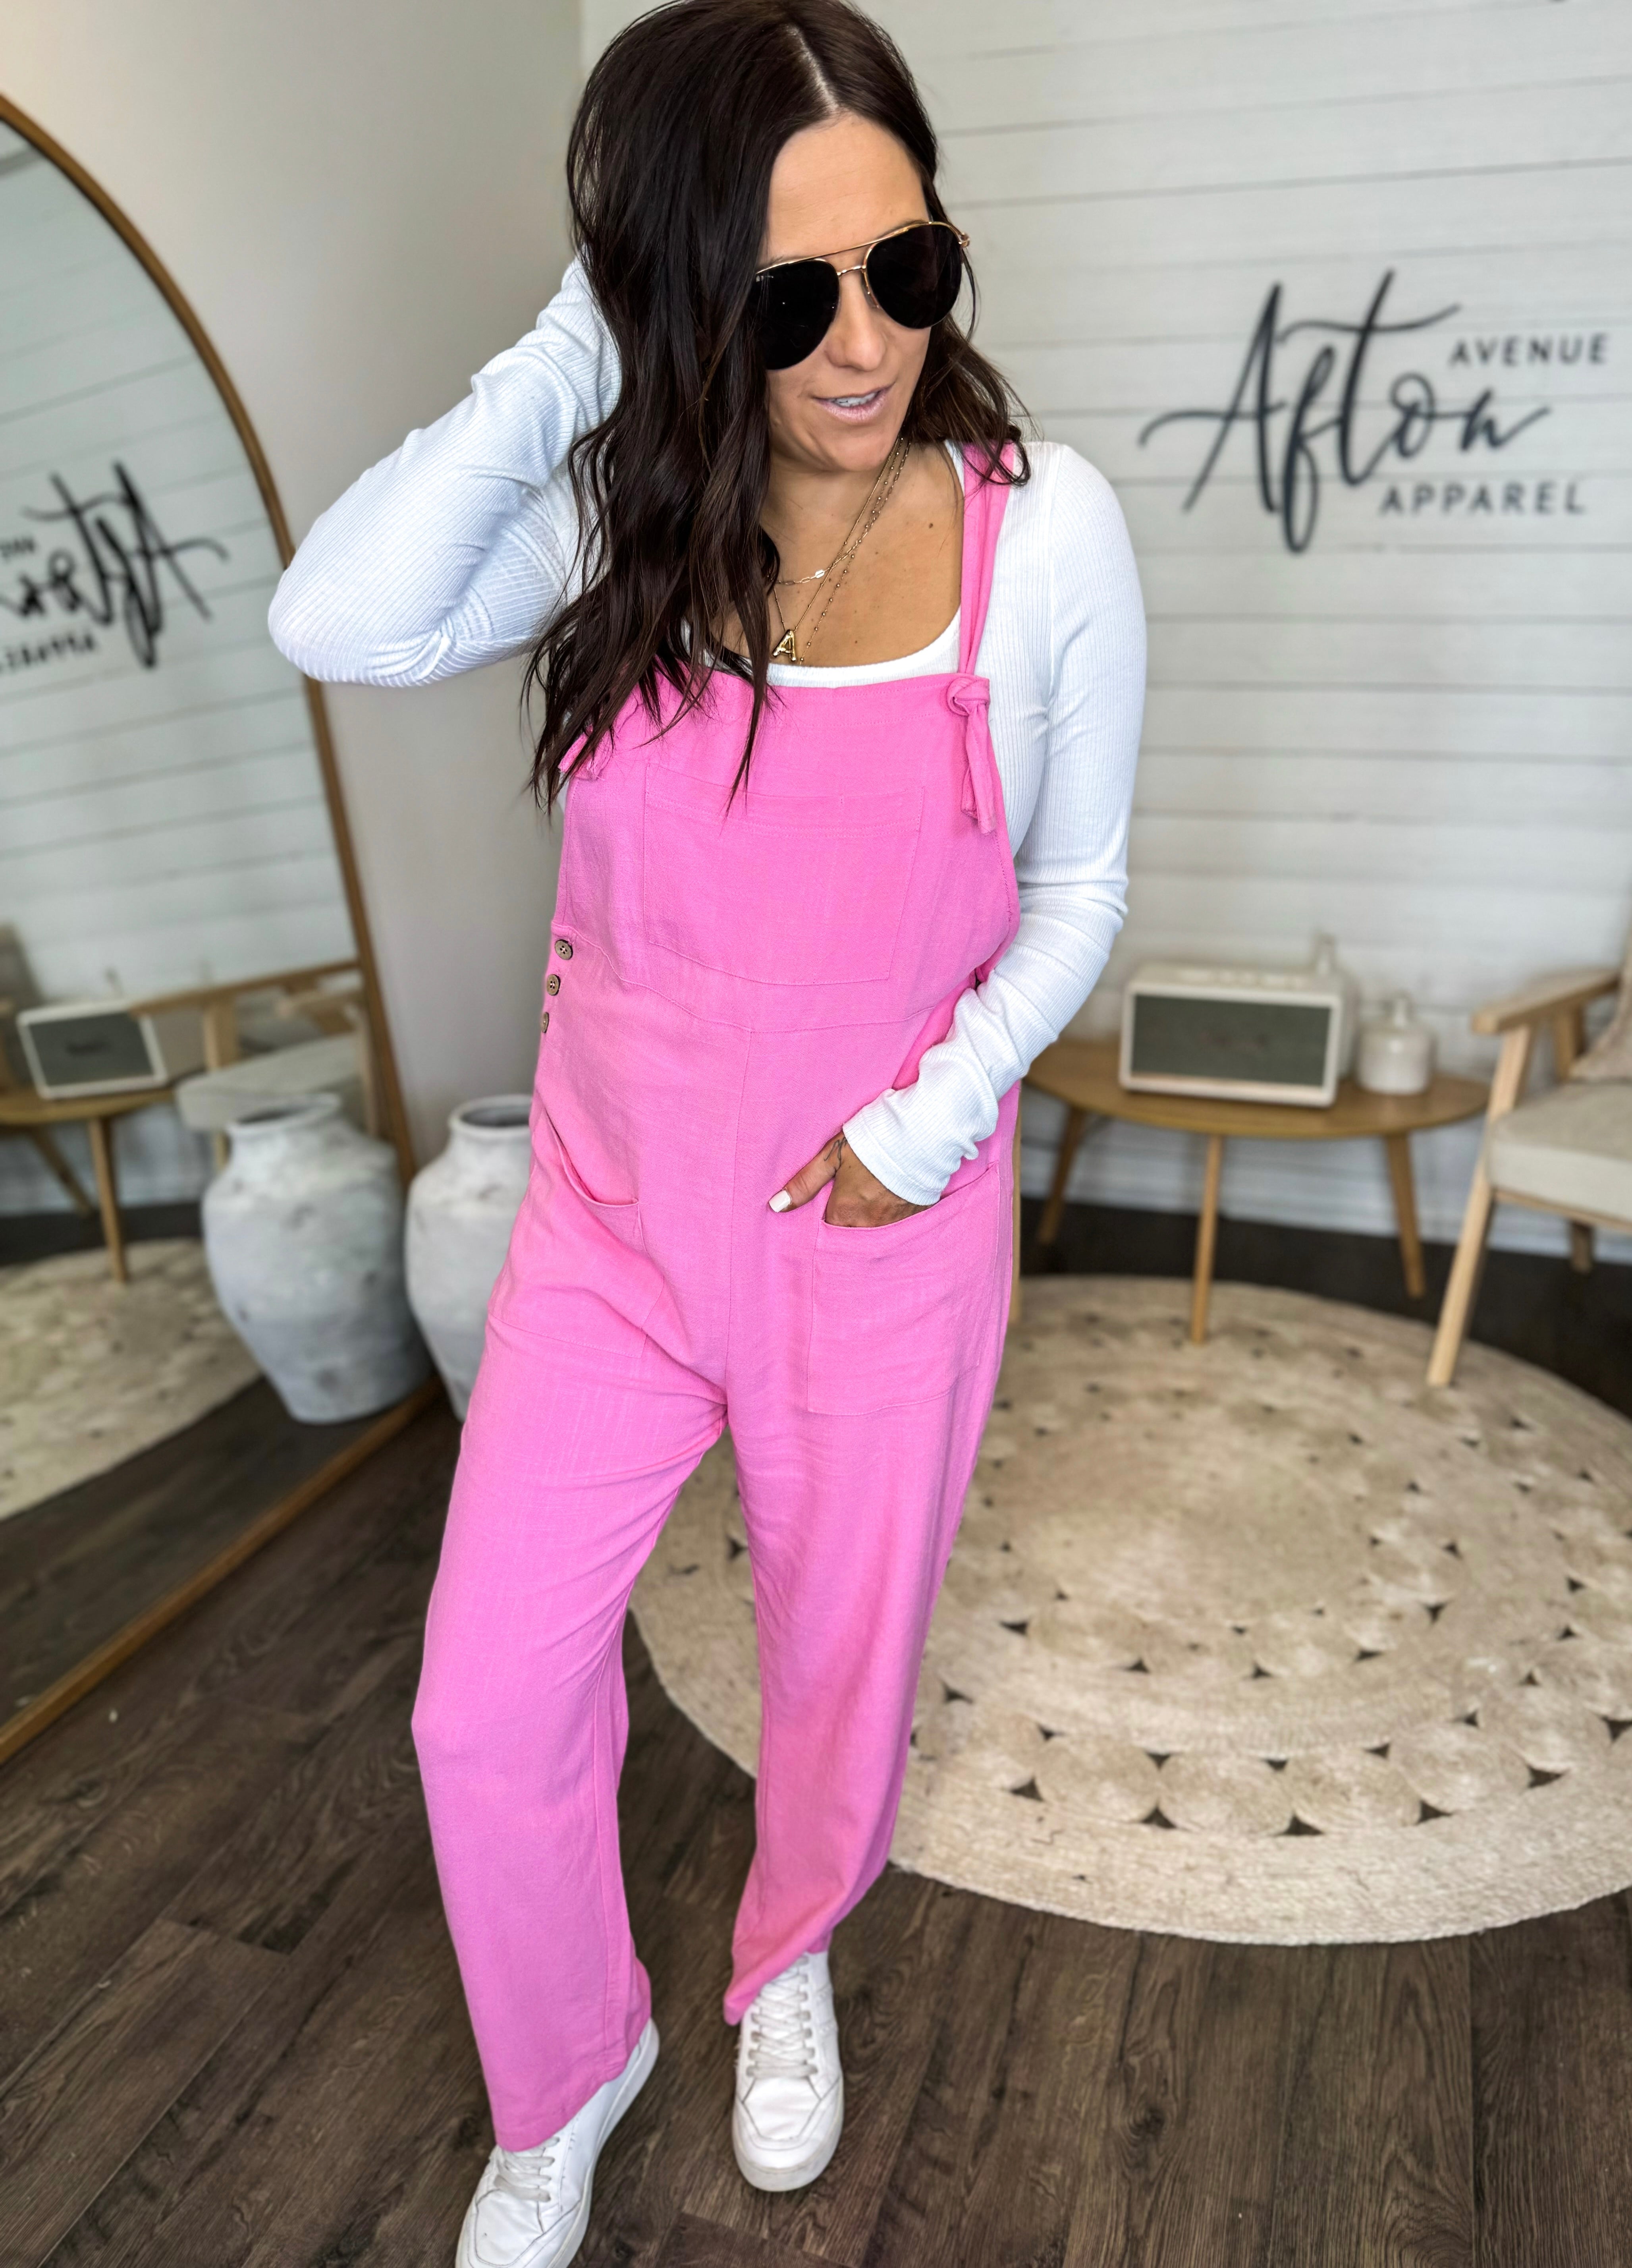 Pour a Little My Way Knotted Jumpsuit